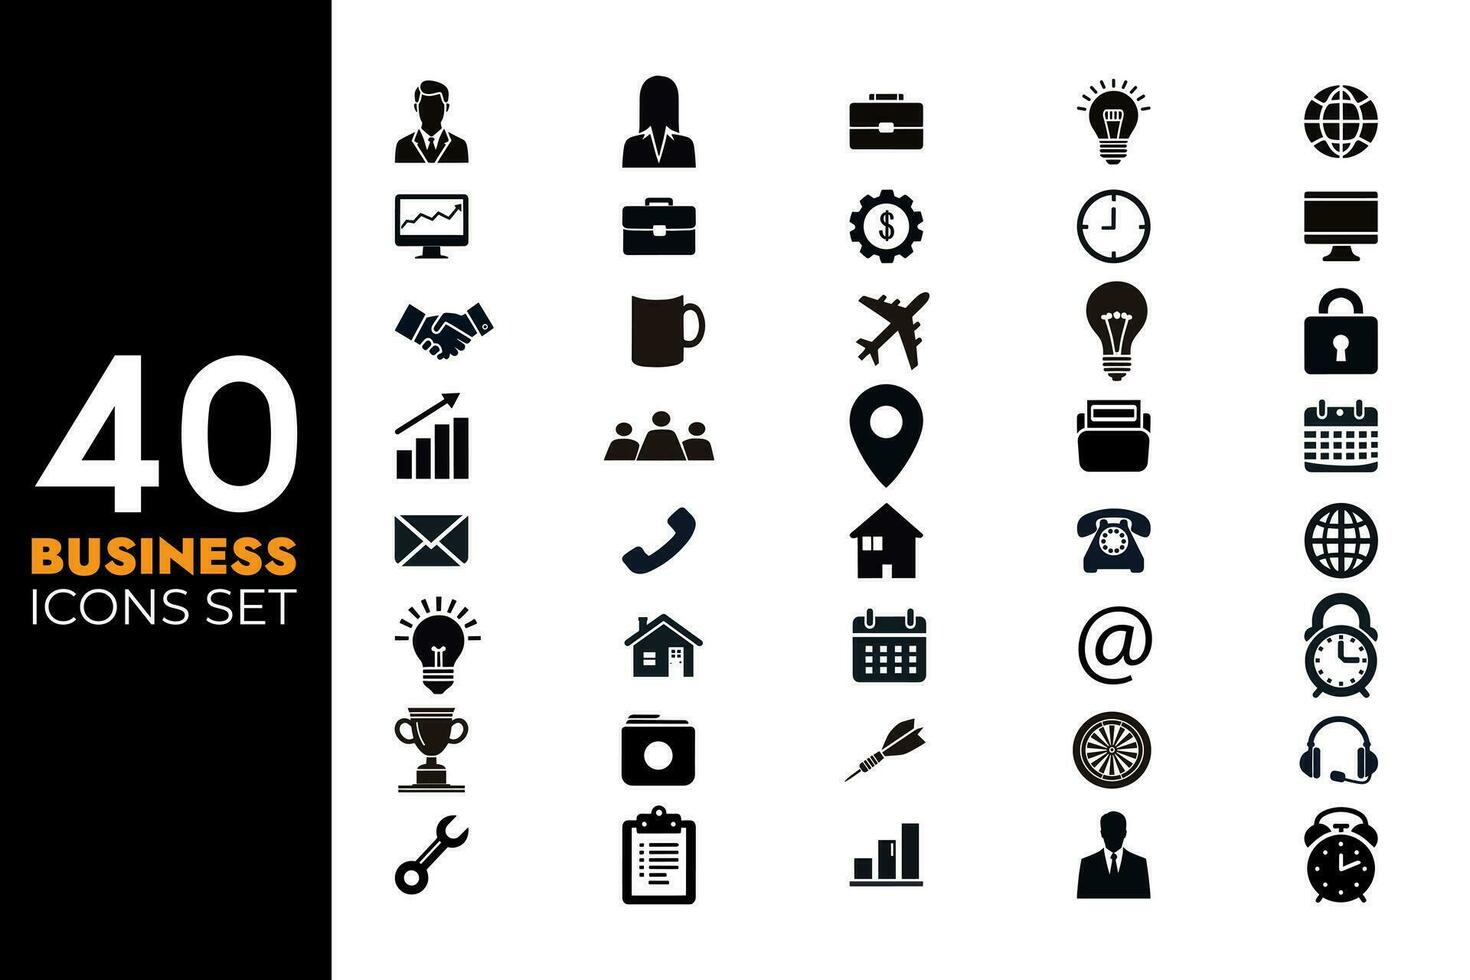 40 Popular Business Vector Icons Set